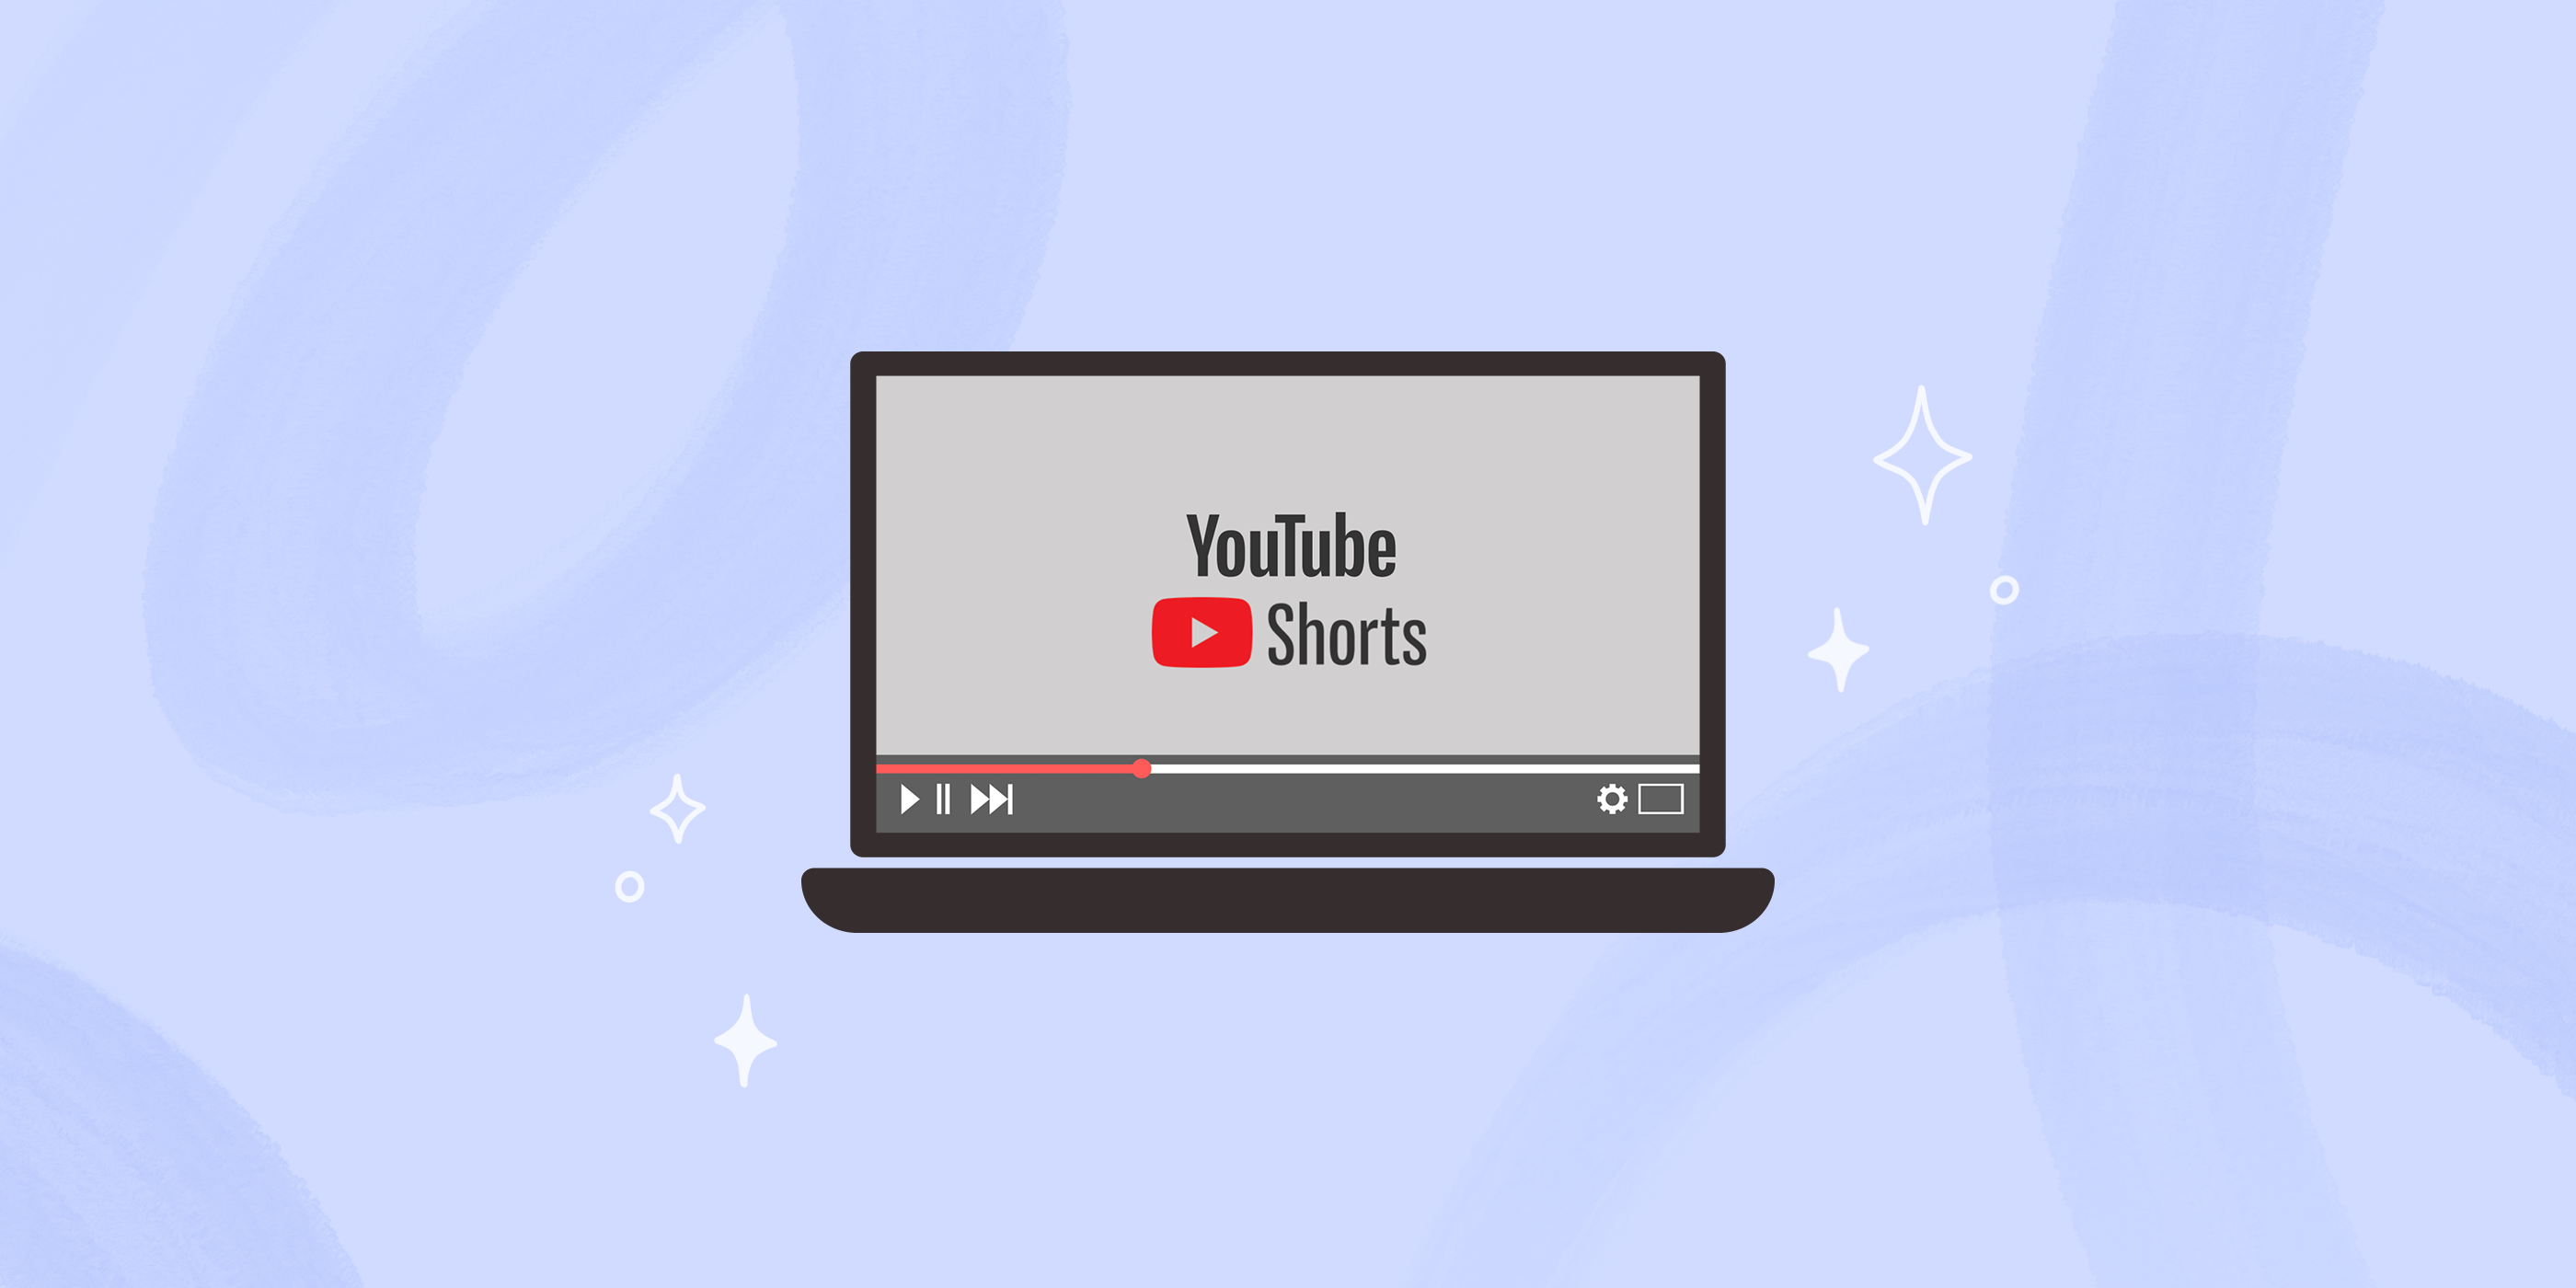 How to Make YouTube Shorts